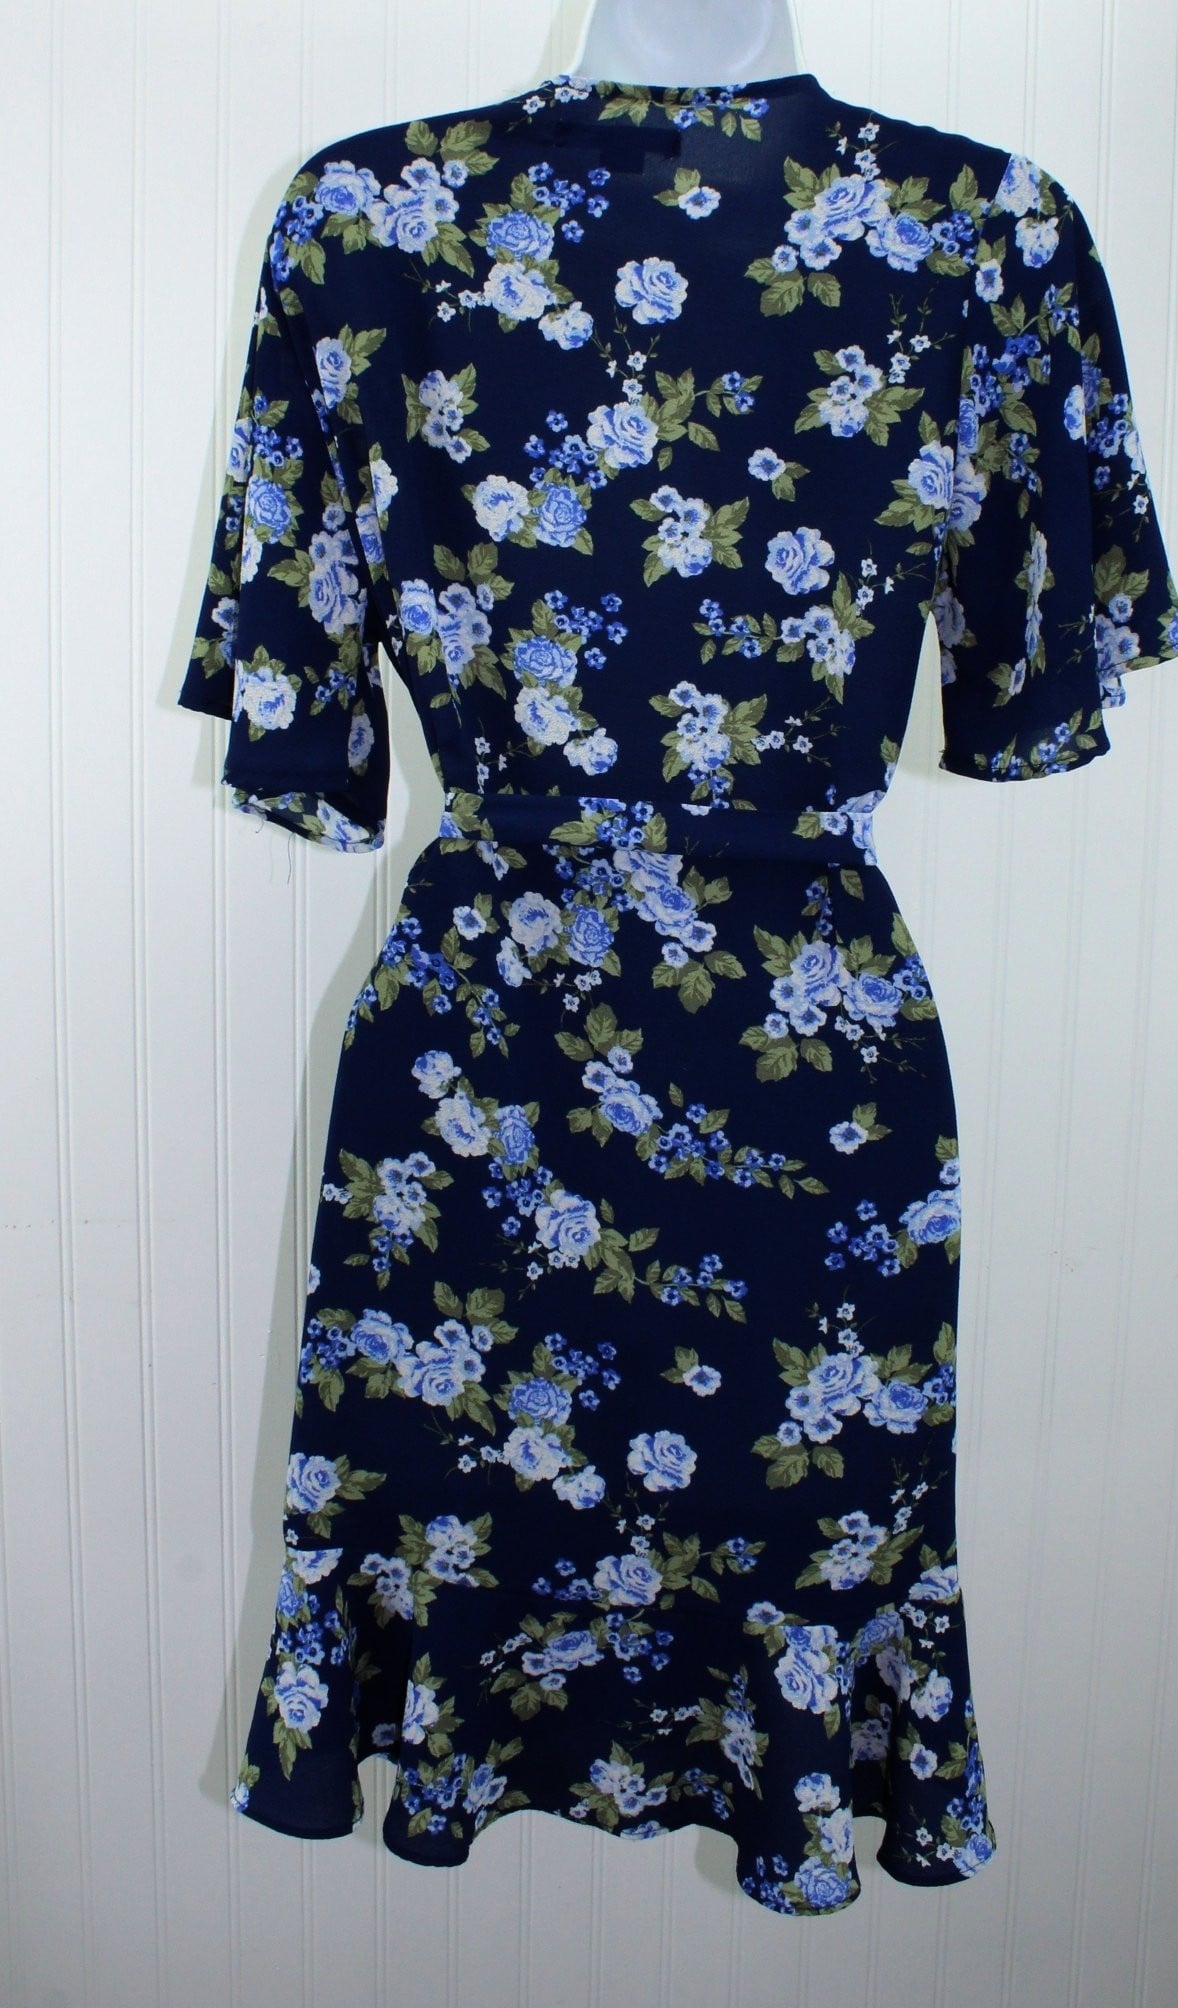 Paper Tee Dress Navy Roses Print Flouncey Sassy Belted Plunge Neck good feel on body